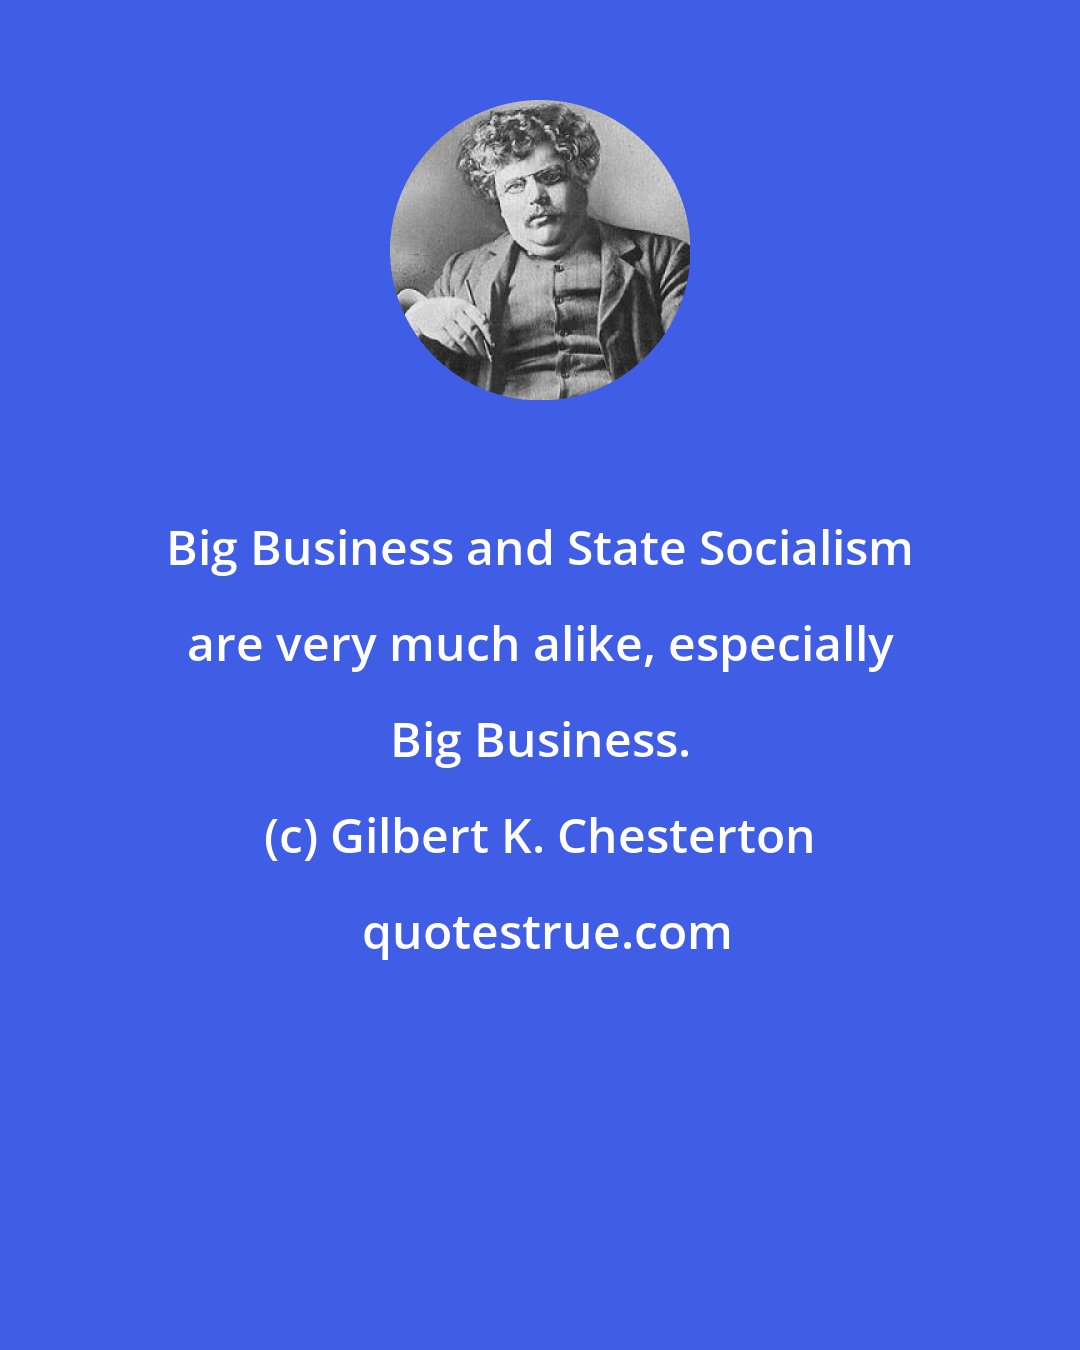 Gilbert K. Chesterton: Big Business and State Socialism are very much alike, especially Big Business.